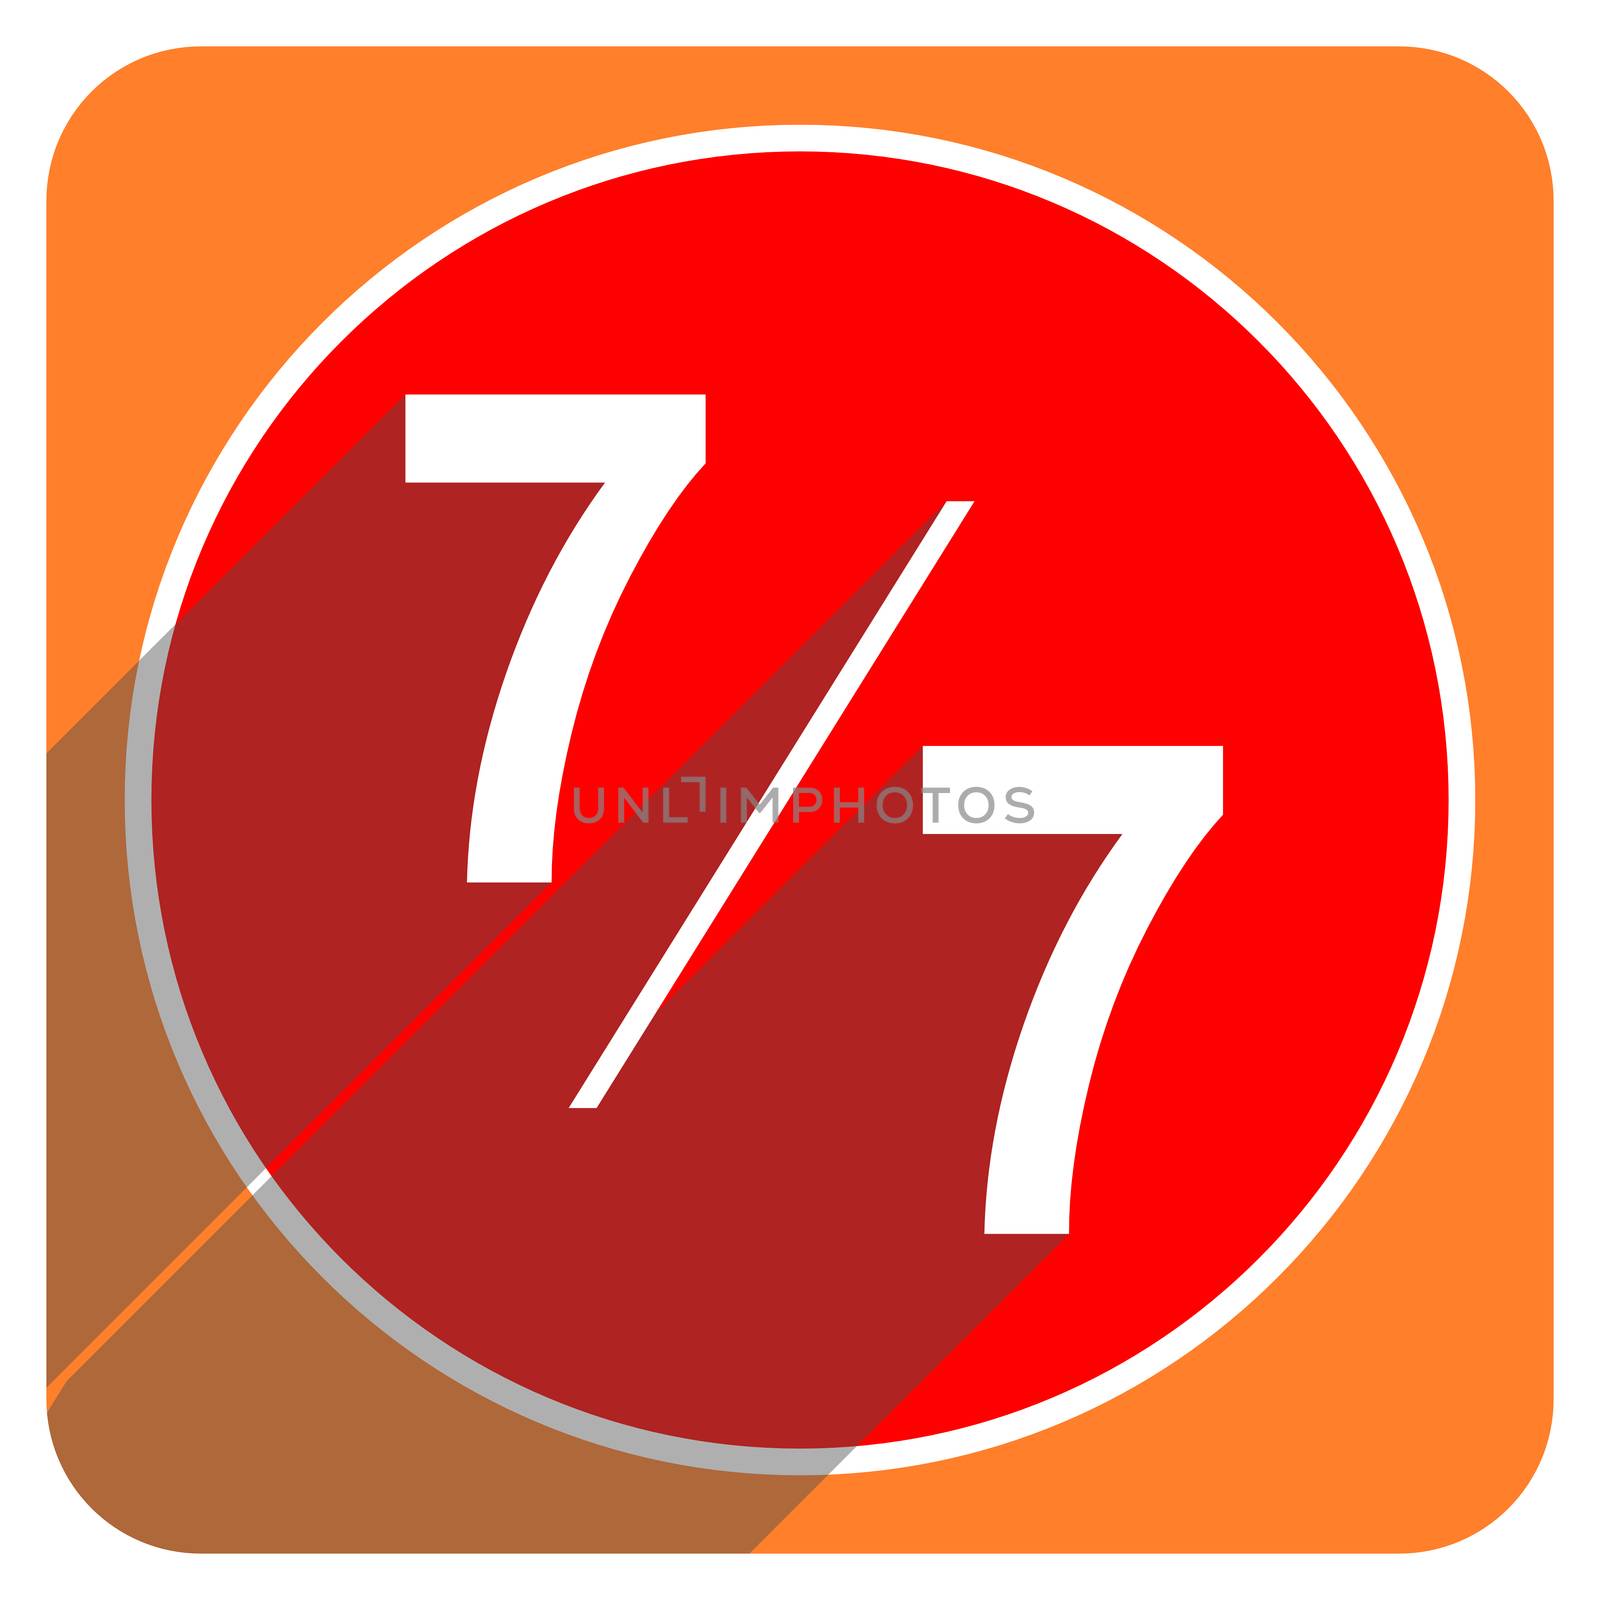 7 per 7 red flat icon isolated by alexwhite